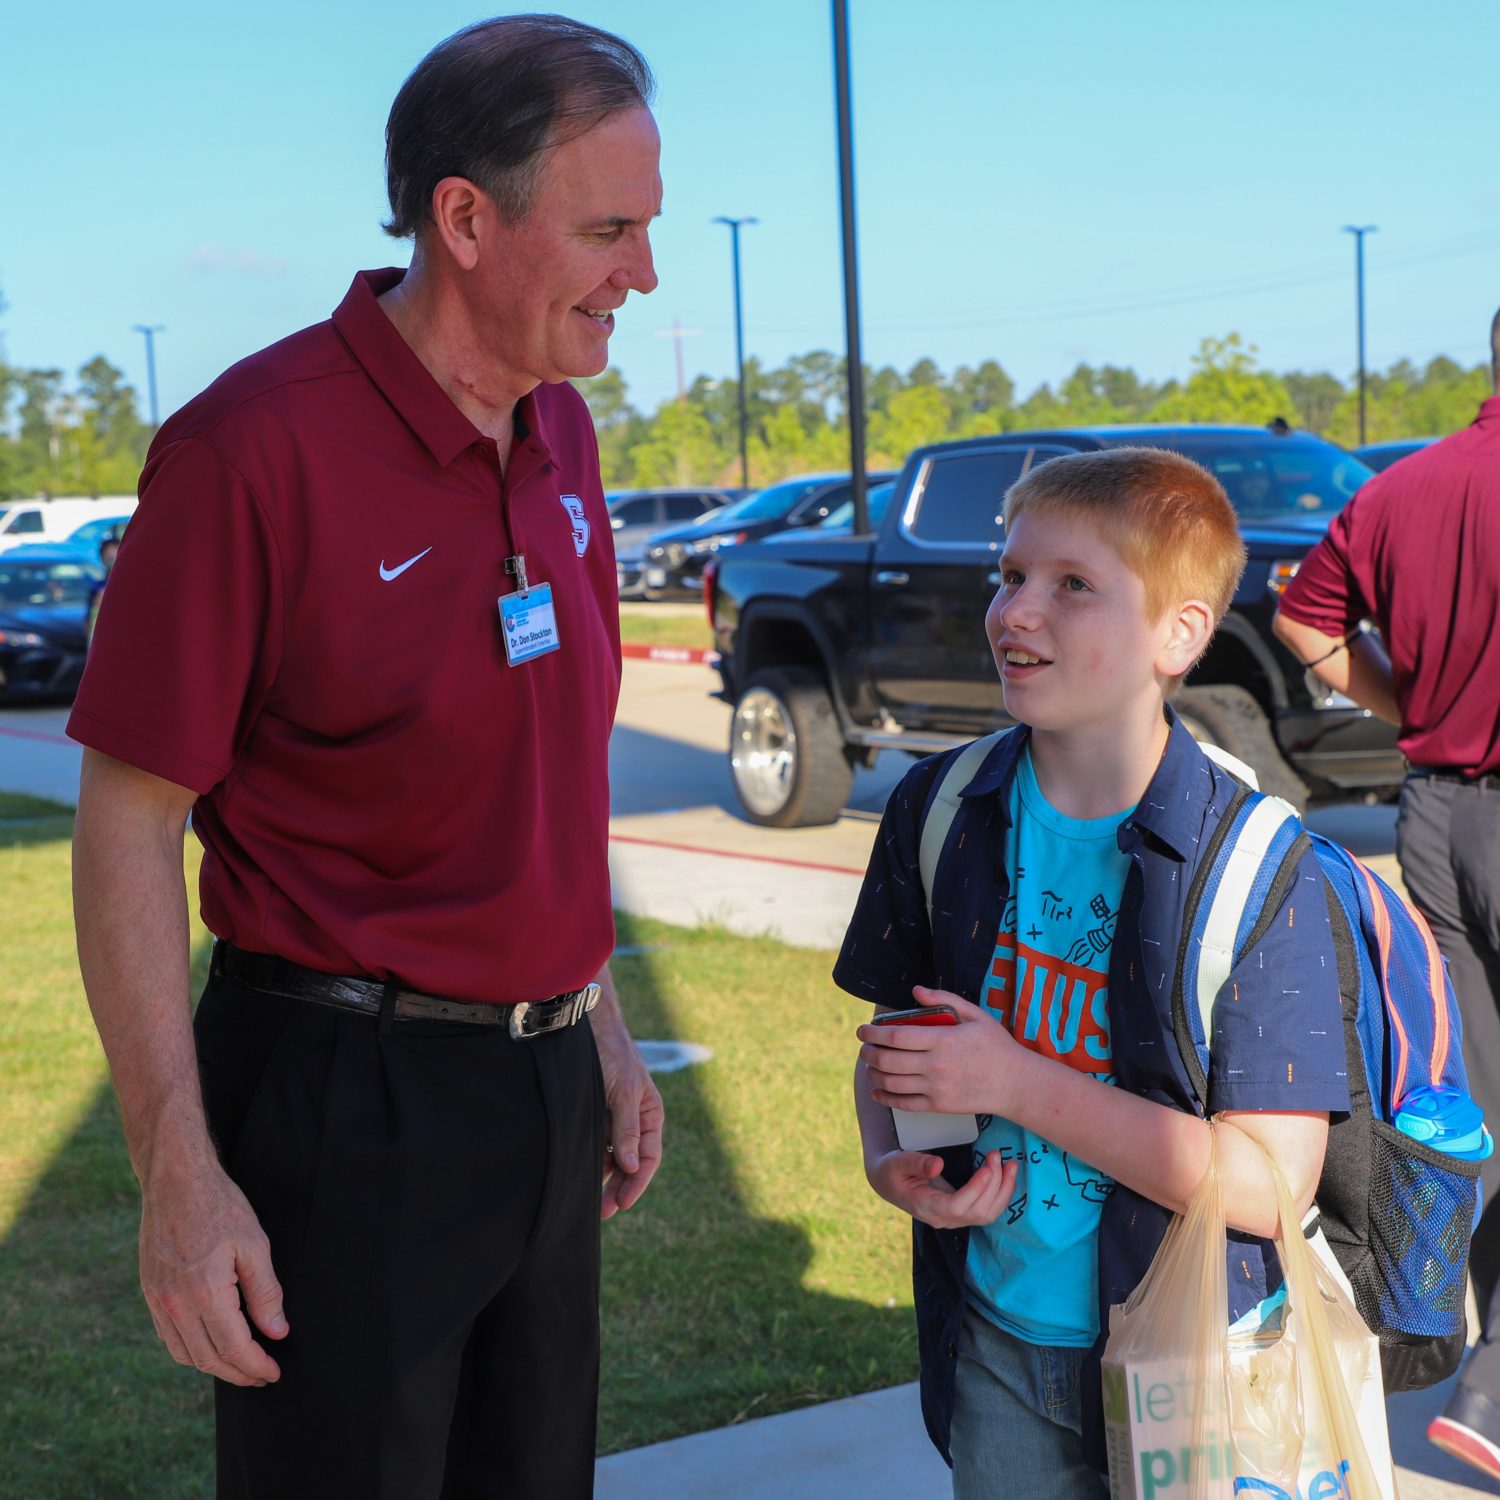 "A Student is greeted as they enter the school building."